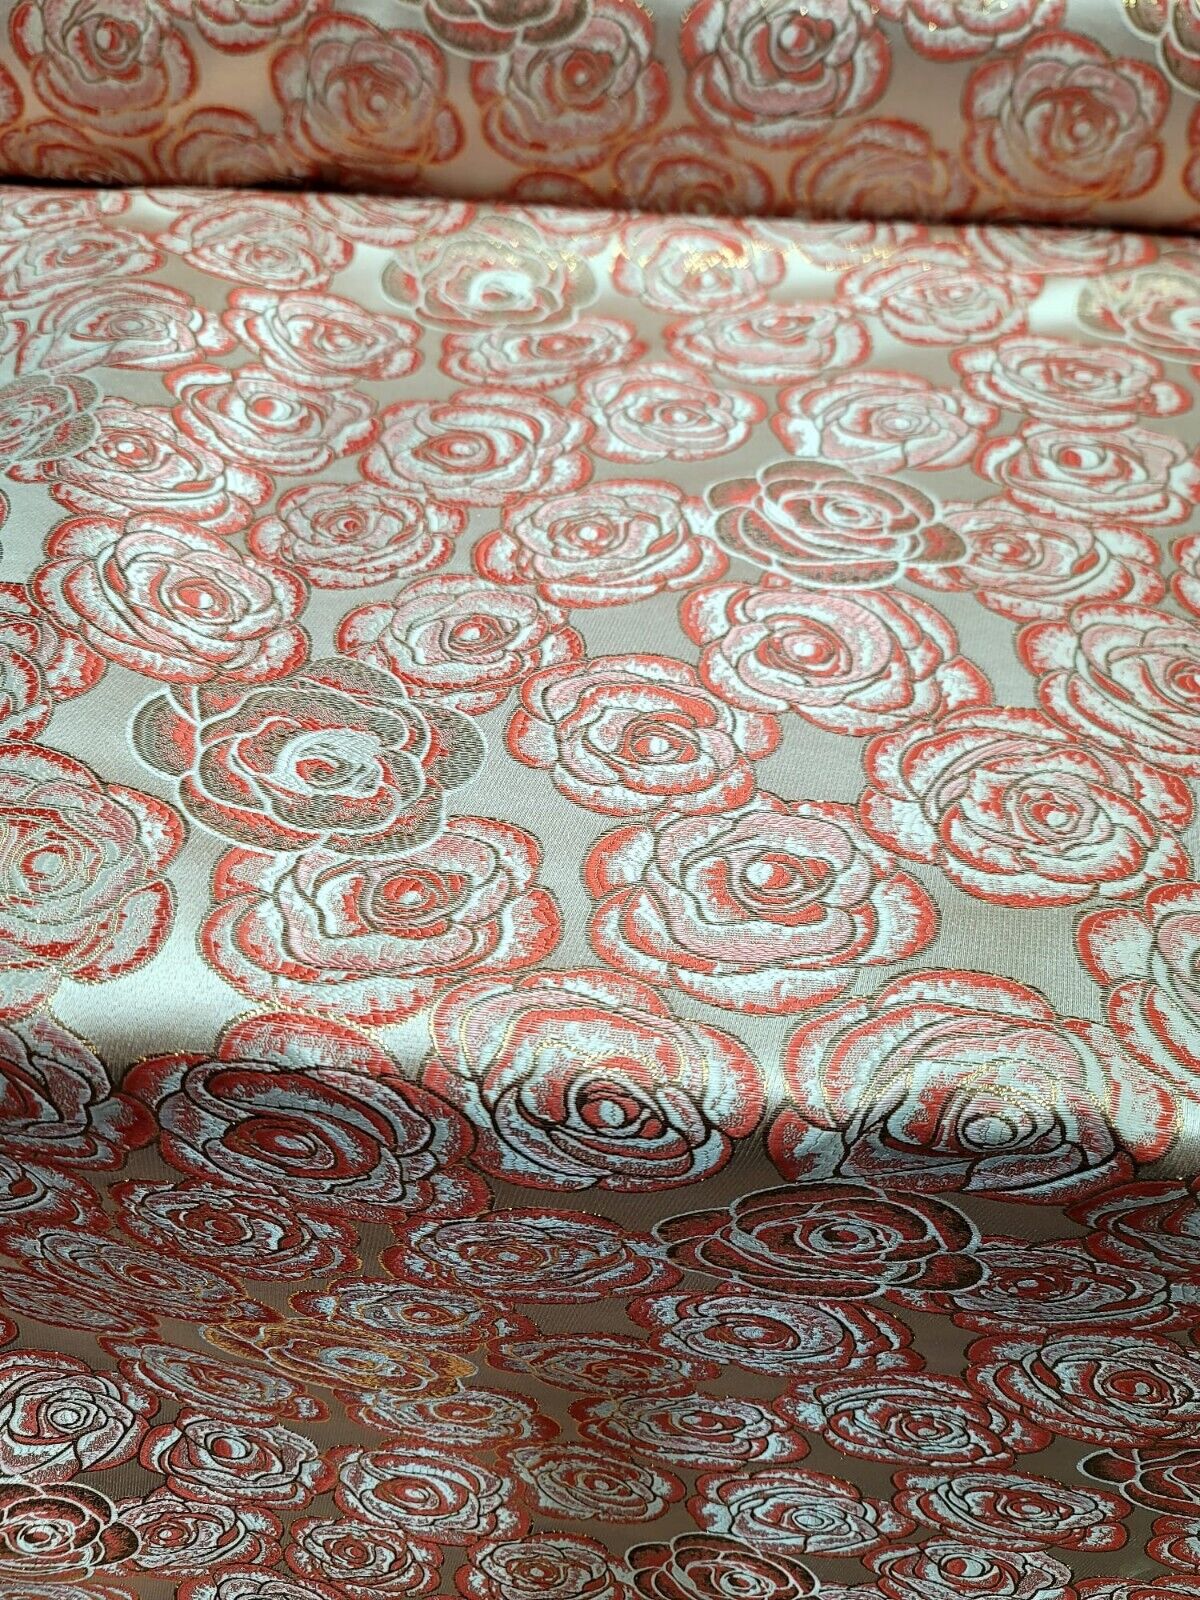 CORAL FLORAL BROCADE FABRIC SOLD BY THE YARD ACCENT GOLD FOR DRESS UPHOLSTERY